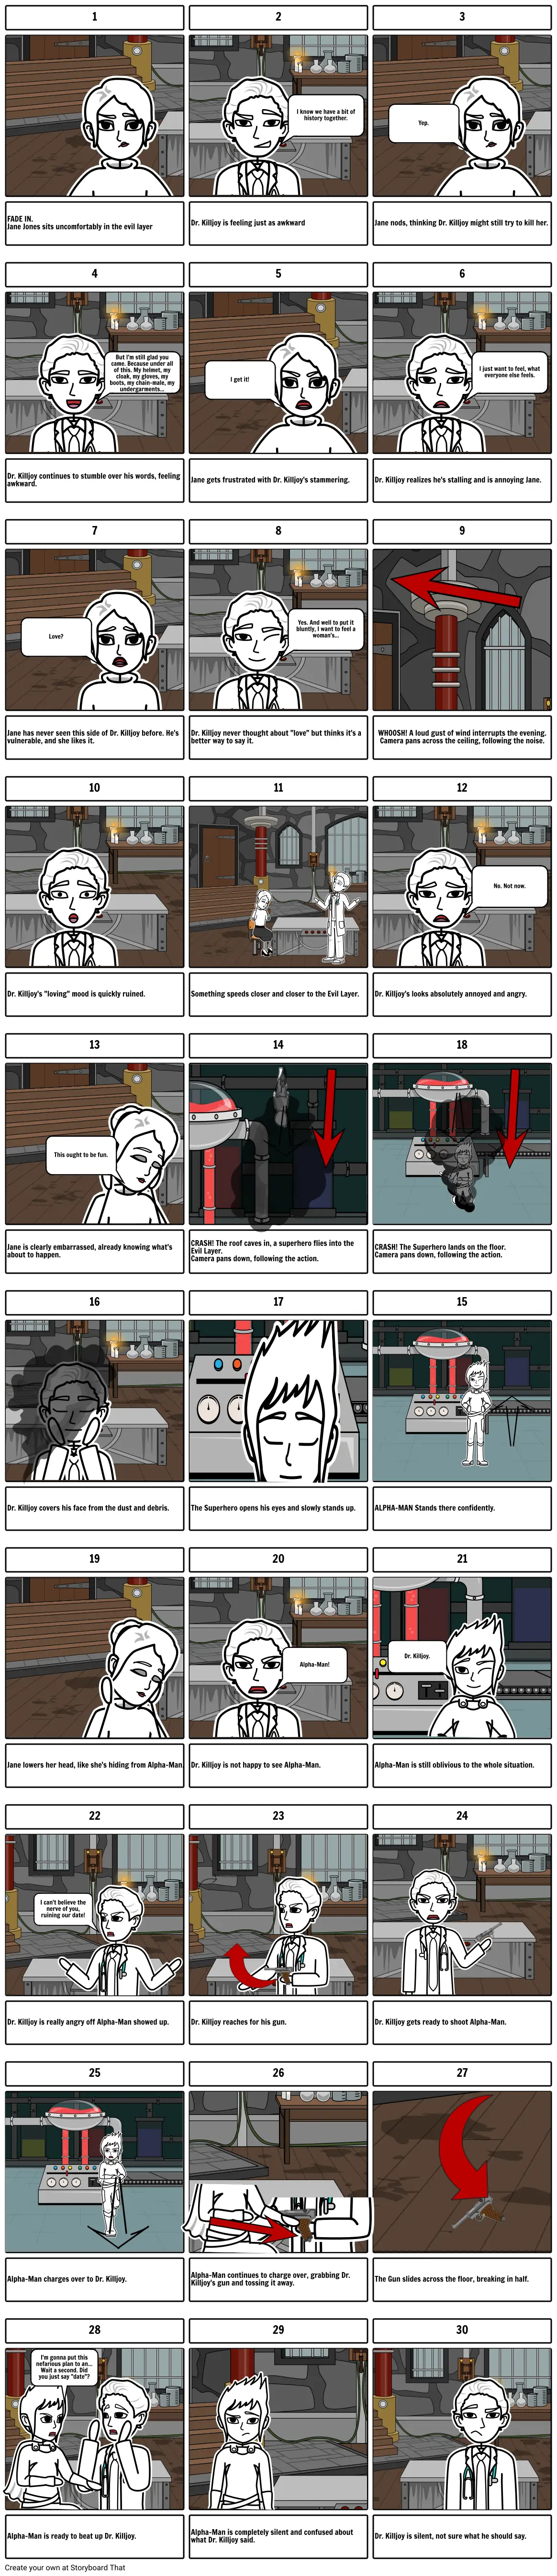 A Date With A Super Villain Storyboards